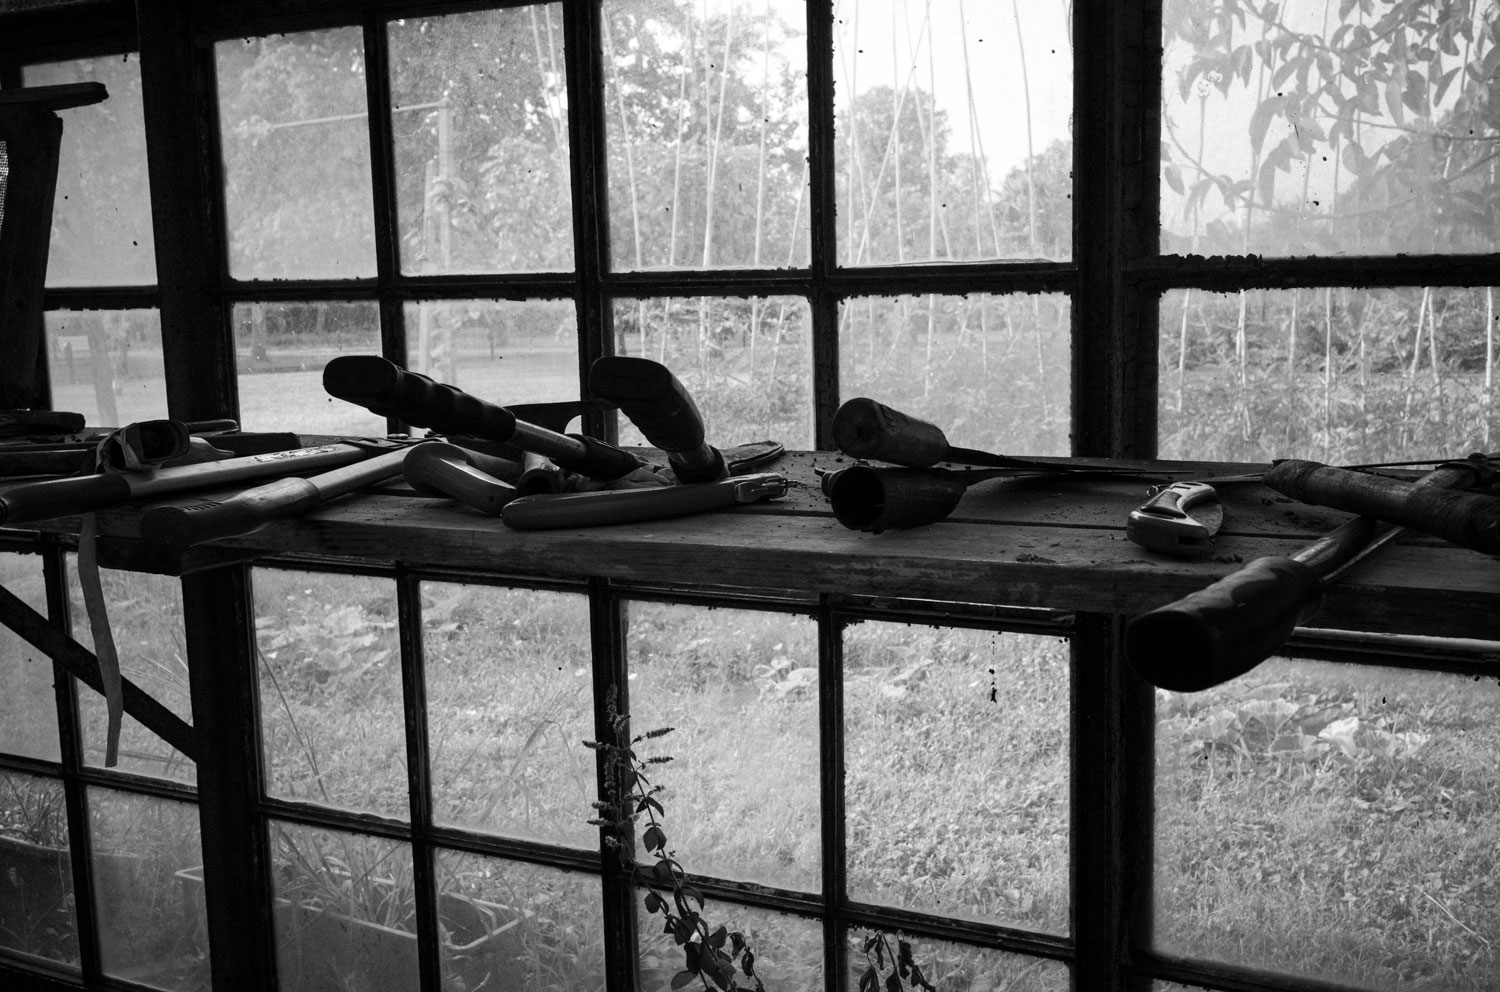 Tools in the Greenhouse, photograph by Carlo Soffietti, 2021